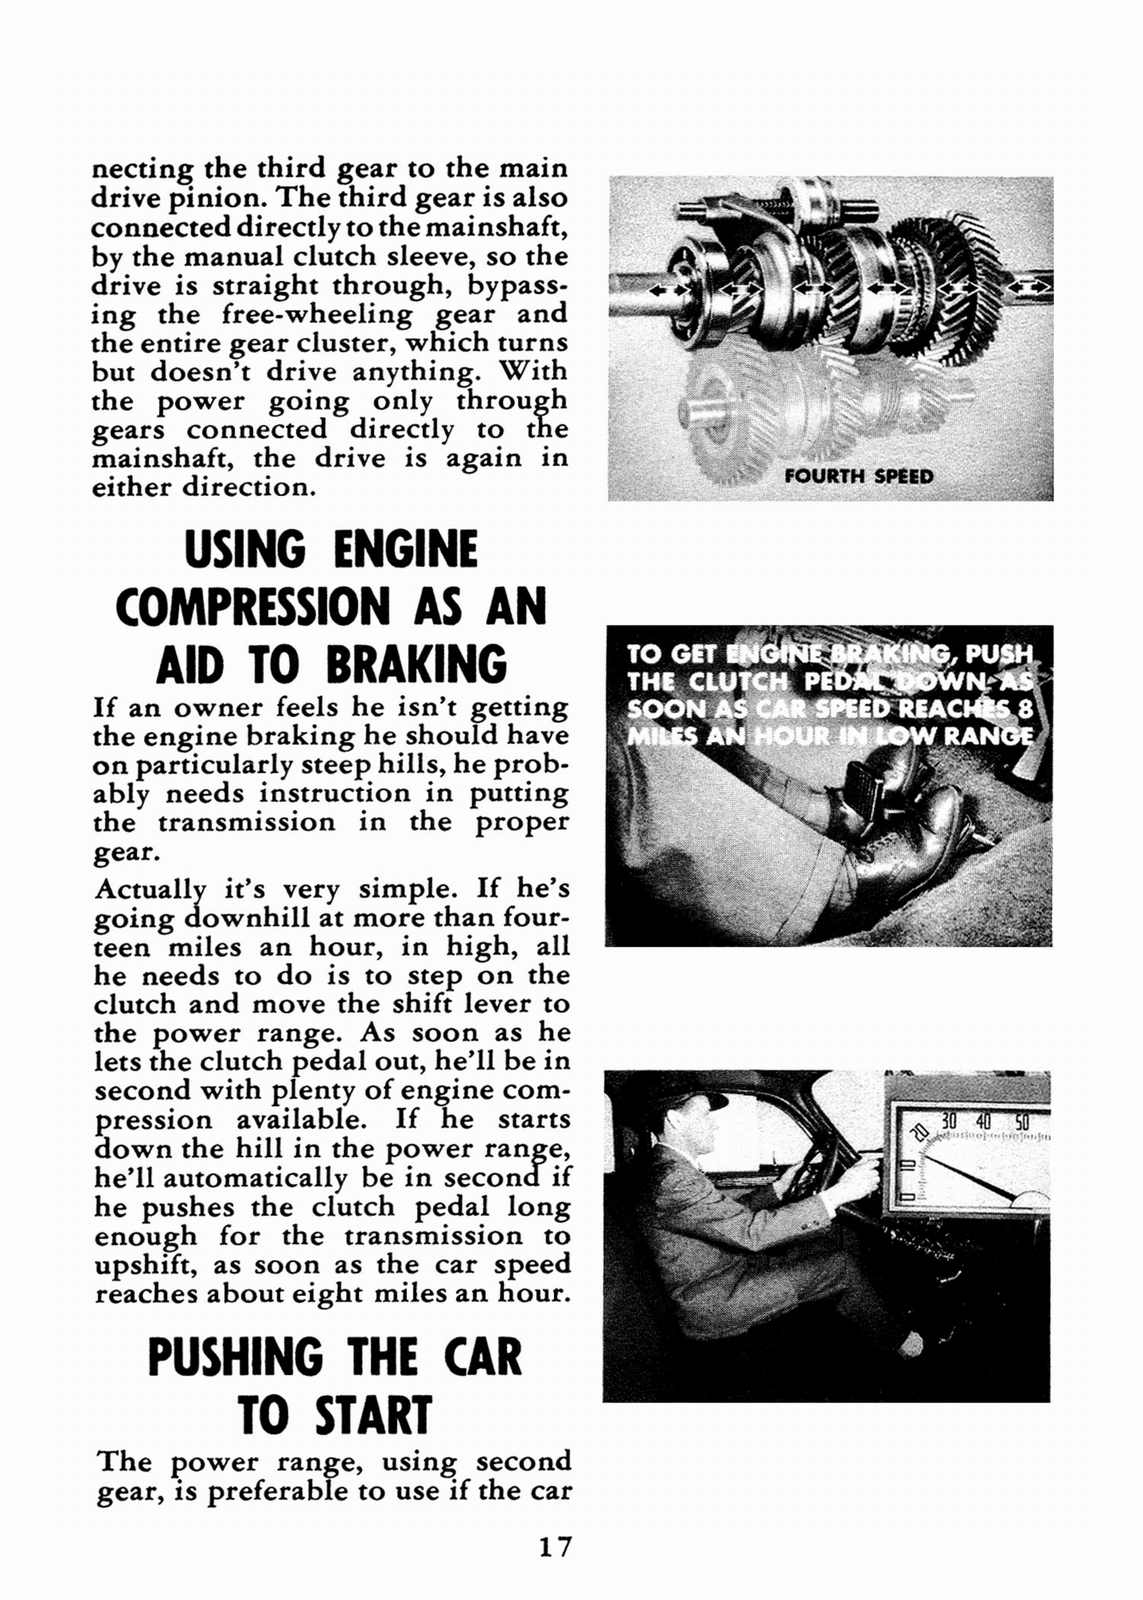 1948 Chrysler Fluid Drive Booklet Page 9